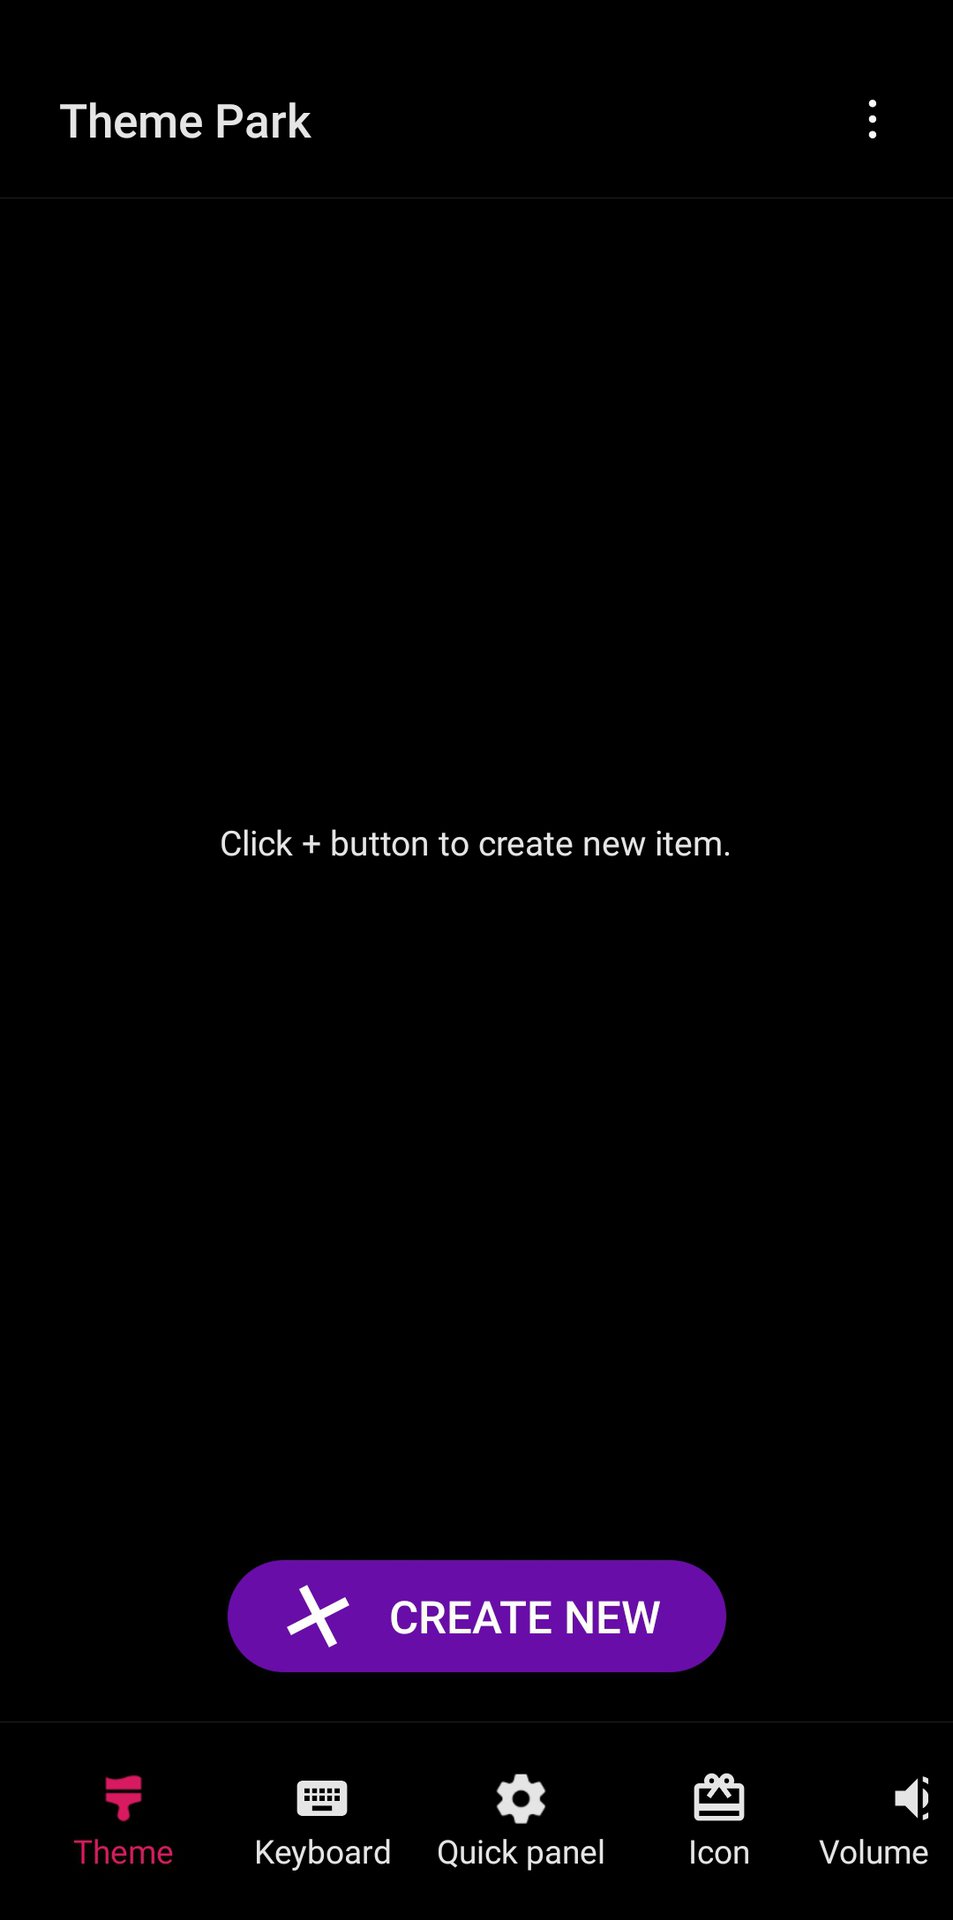 Samsung Theme Park start screen with "create new" button.